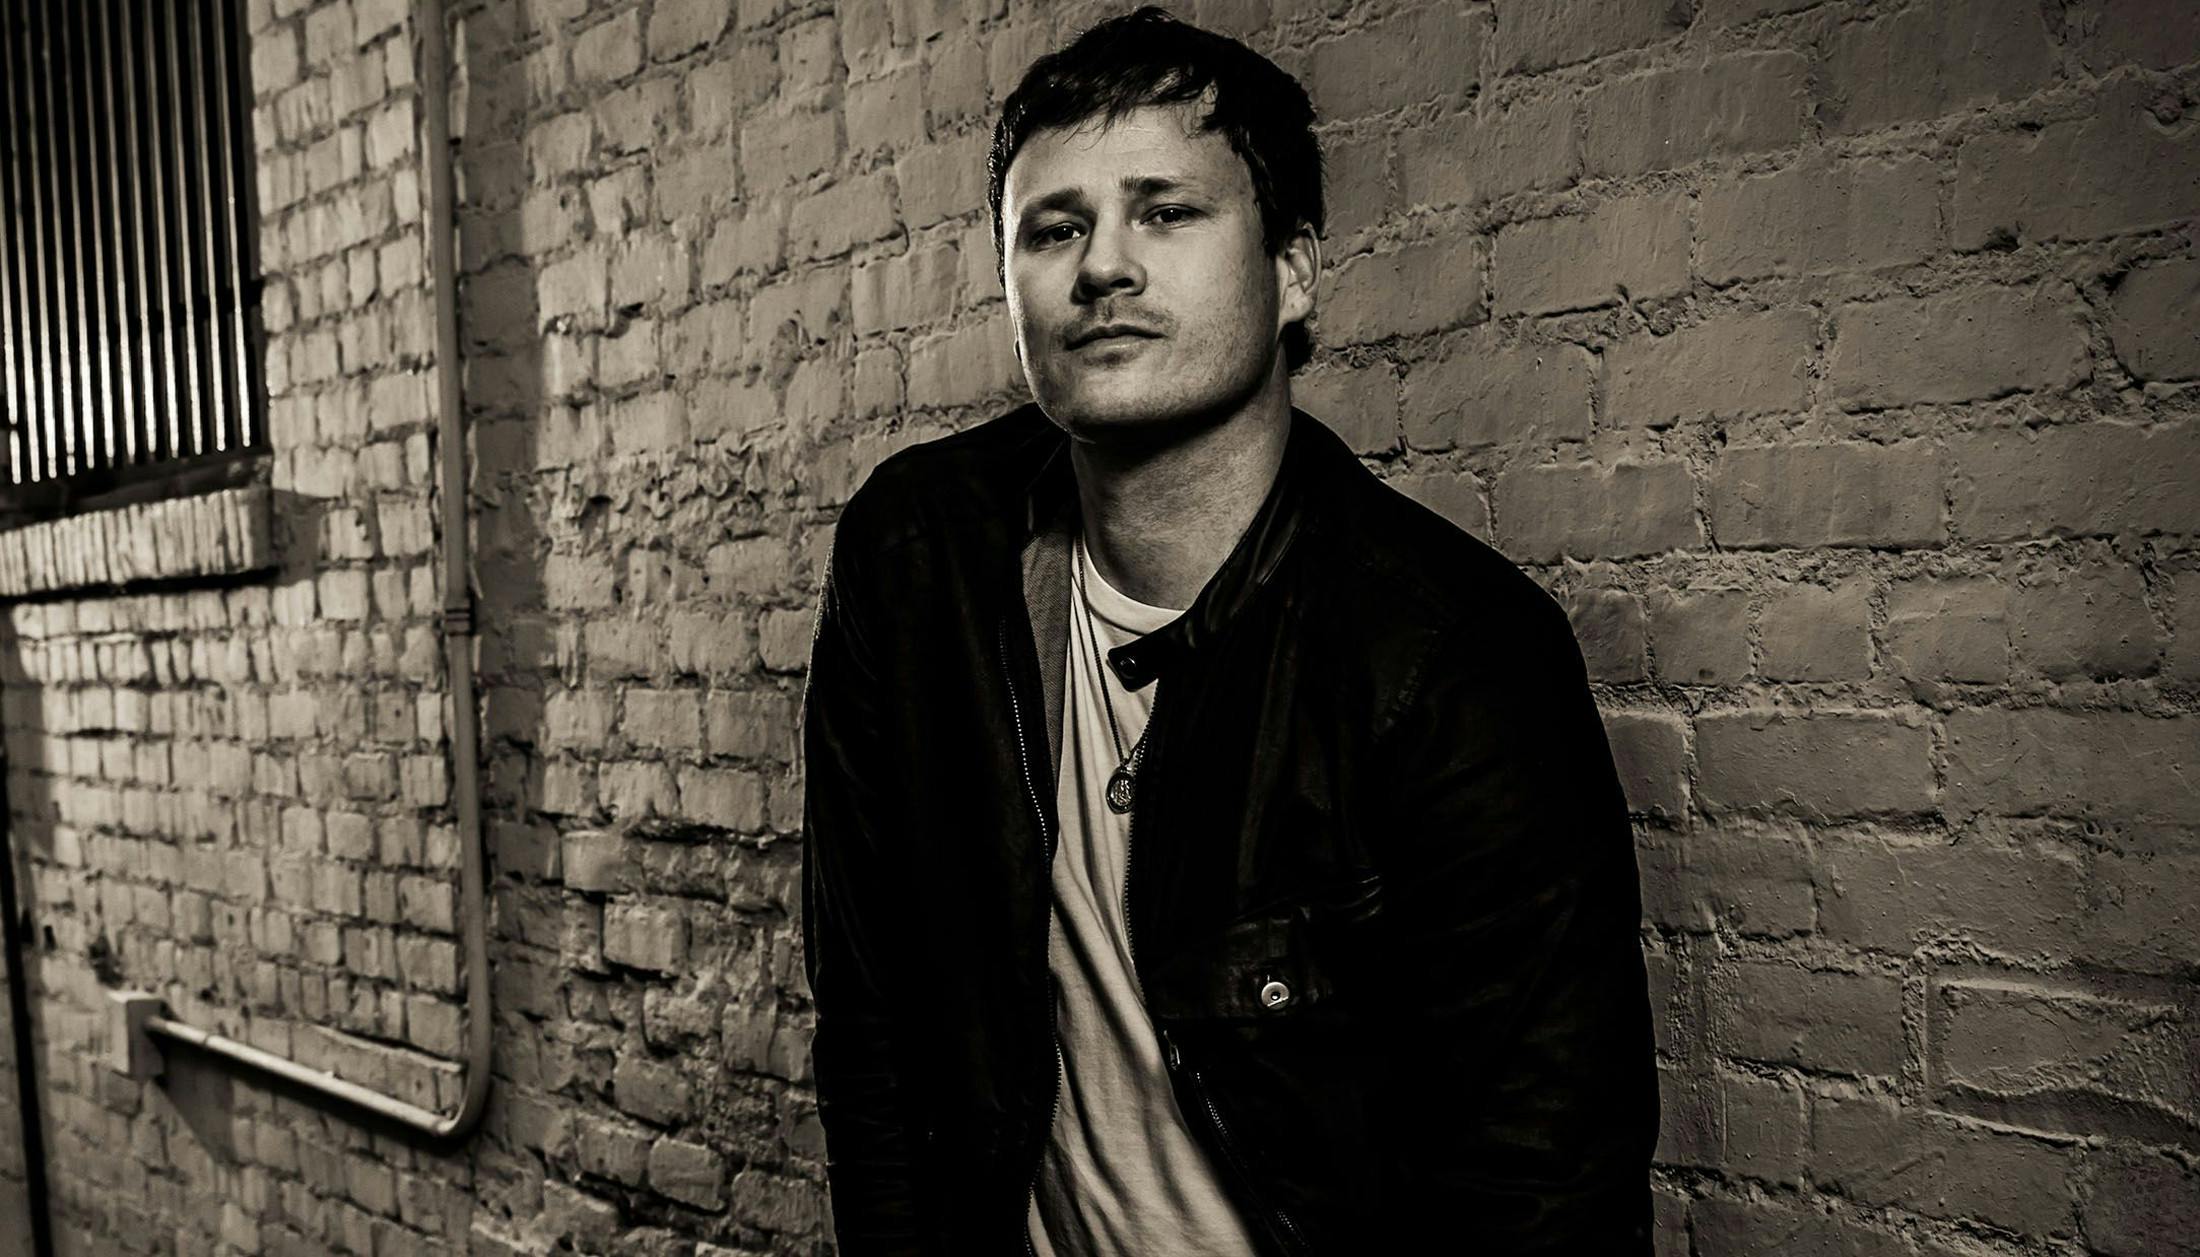 Tom DeLonge Writes Op-Ed Piece On UFOs: "It’s Naïve To Think That They Don’t Exist"